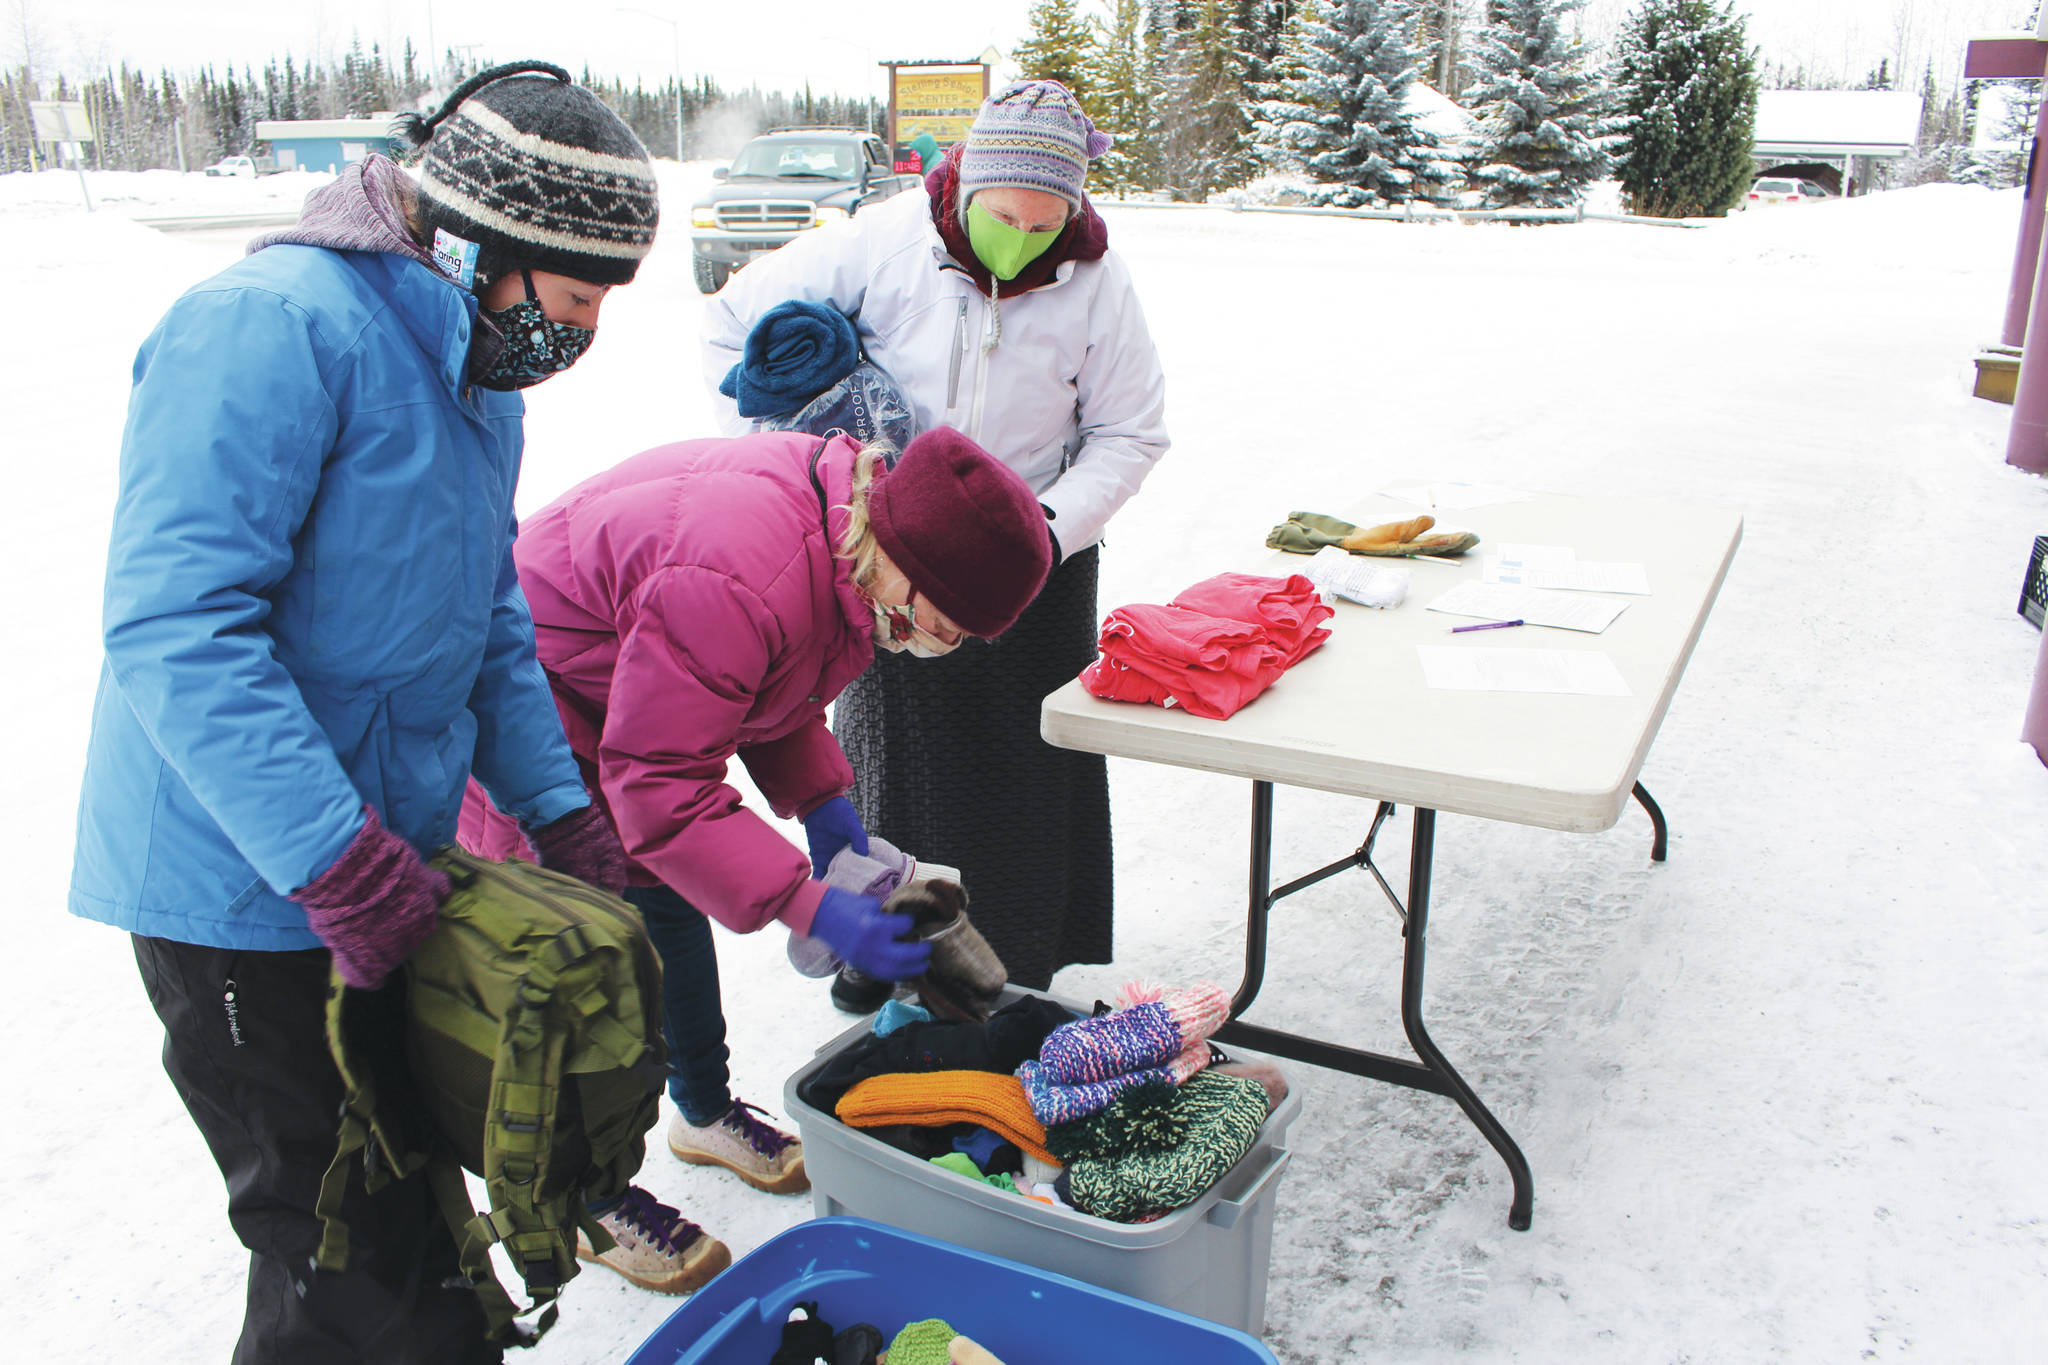 Project Homeless Connect volunteers help Arlene Jasky, center, pick out hats and gloves for a friend during a Project Homeless Connect event at the Sterling Senior Citizens Center in Sterling, Alaska on Feb. 2, 2021. (Photo by Brian Mazurek/Peninsula Clarion)